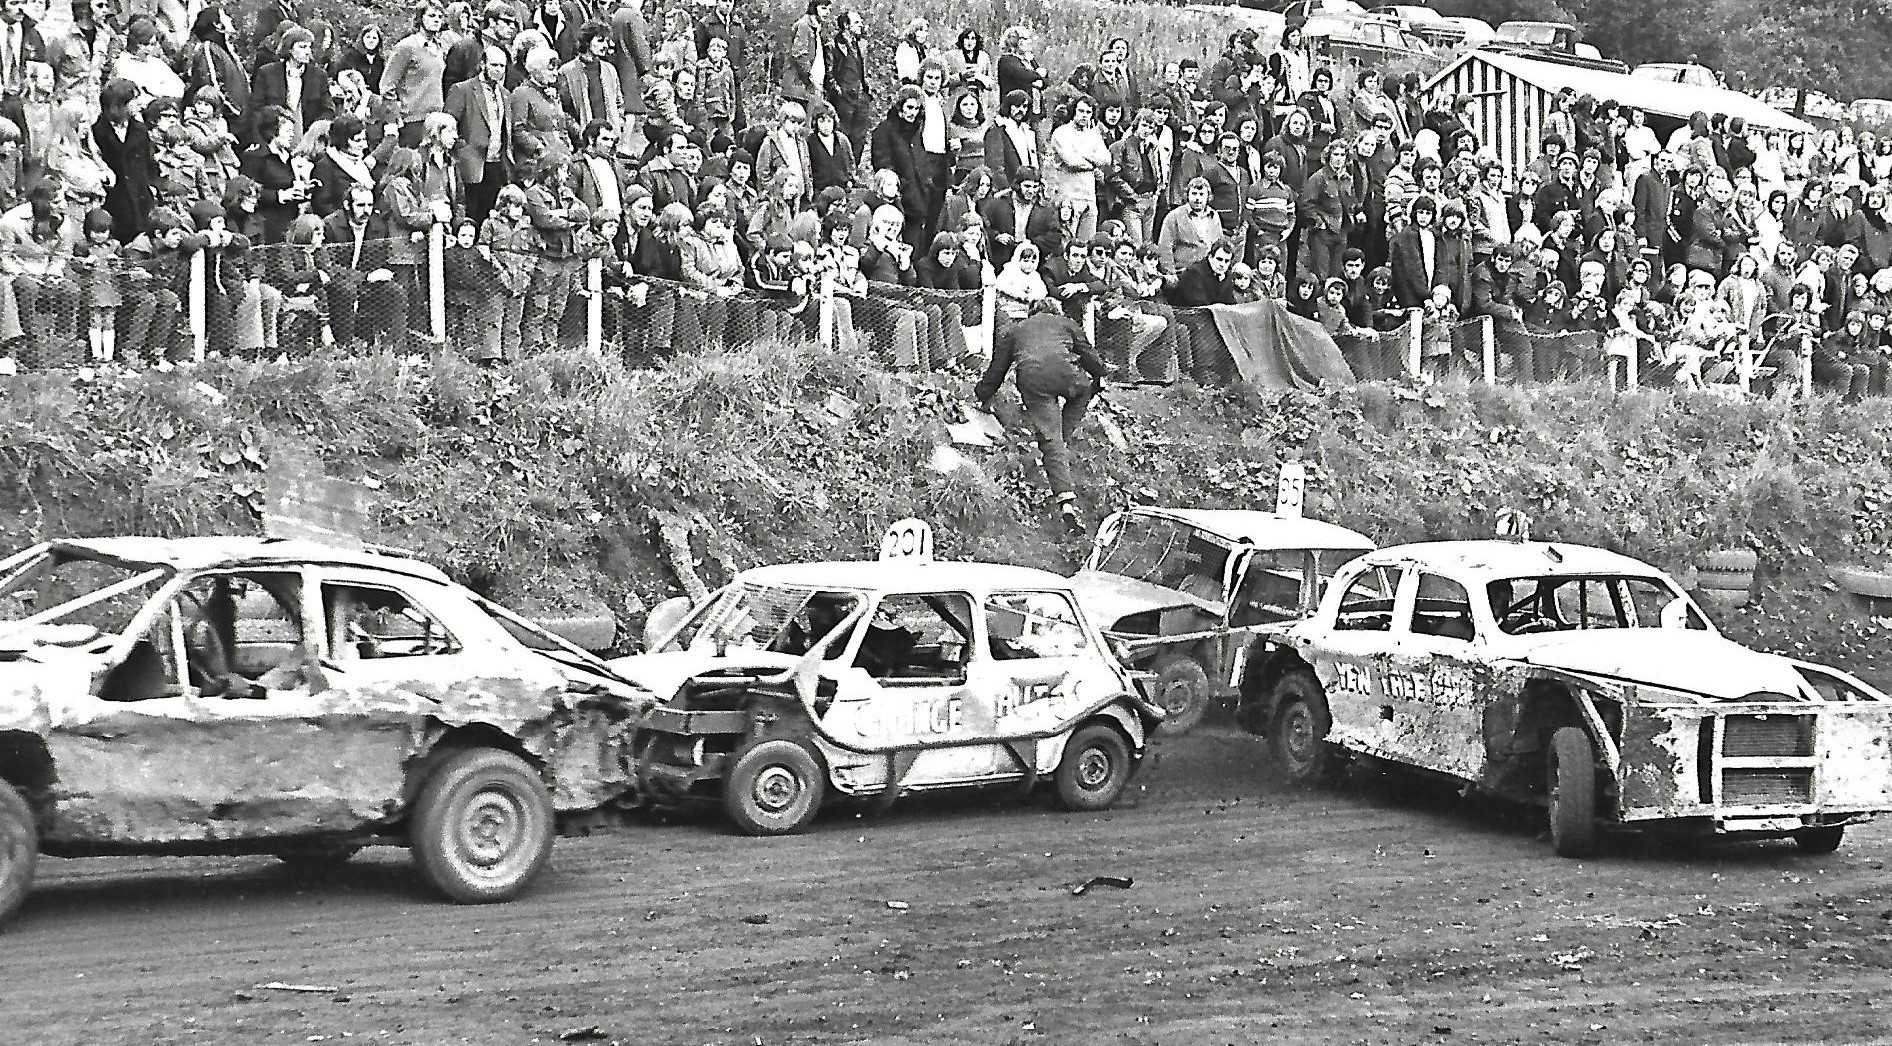 'The Big Three' National Hot Rod Racing in the glory days of the 1970's. 